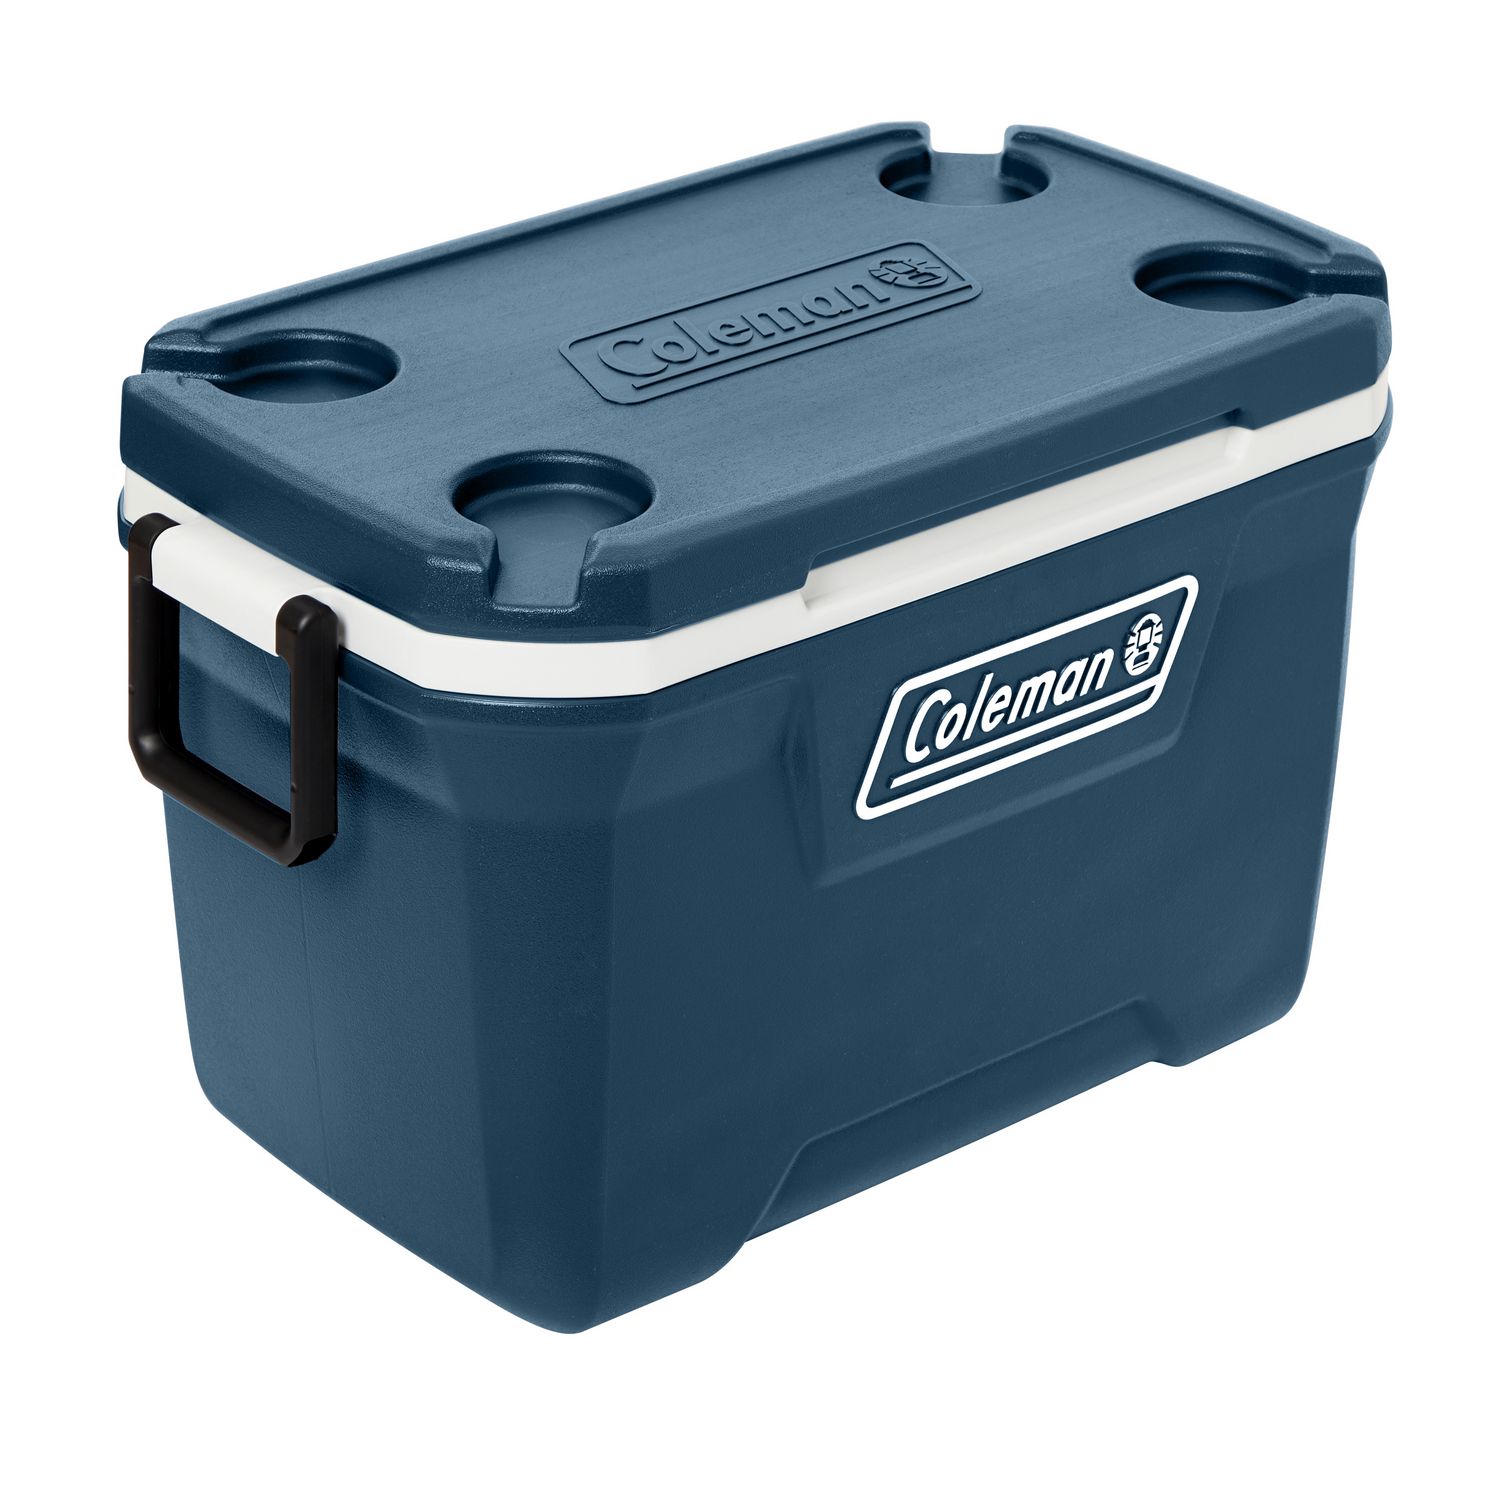 Coleman 52-Quart Extreme Cooler Blue Plastic Camping Picnic Outdoor Ice 